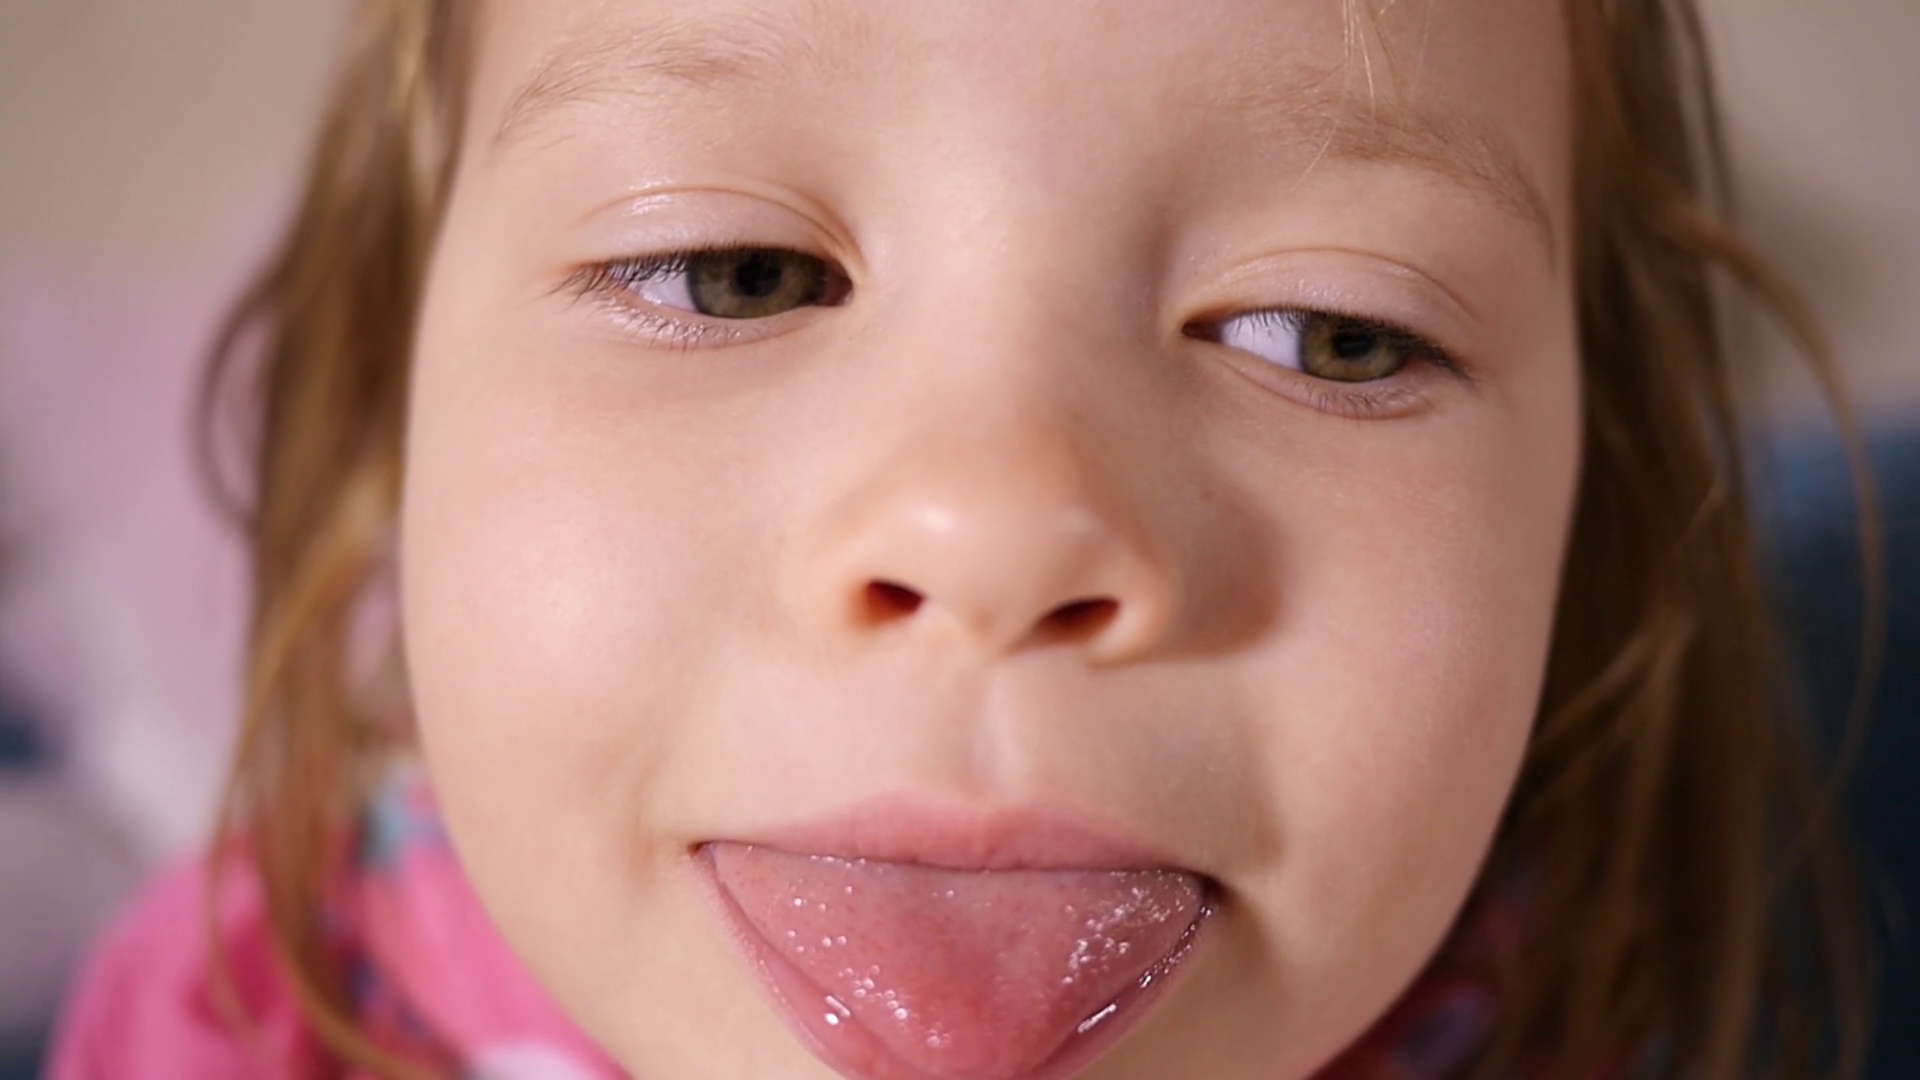 Armed F. reccomend Little girl tongue close up